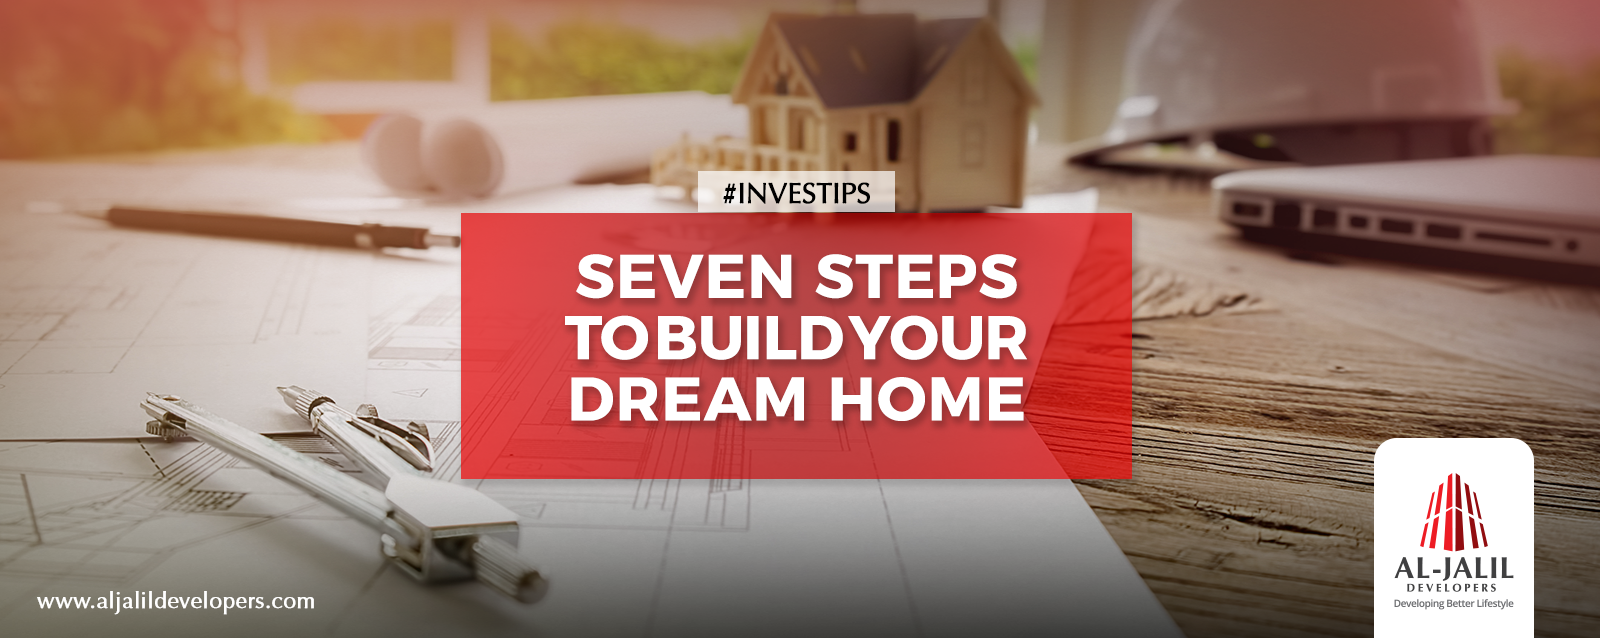 7 Steps to Build Your Dream Home